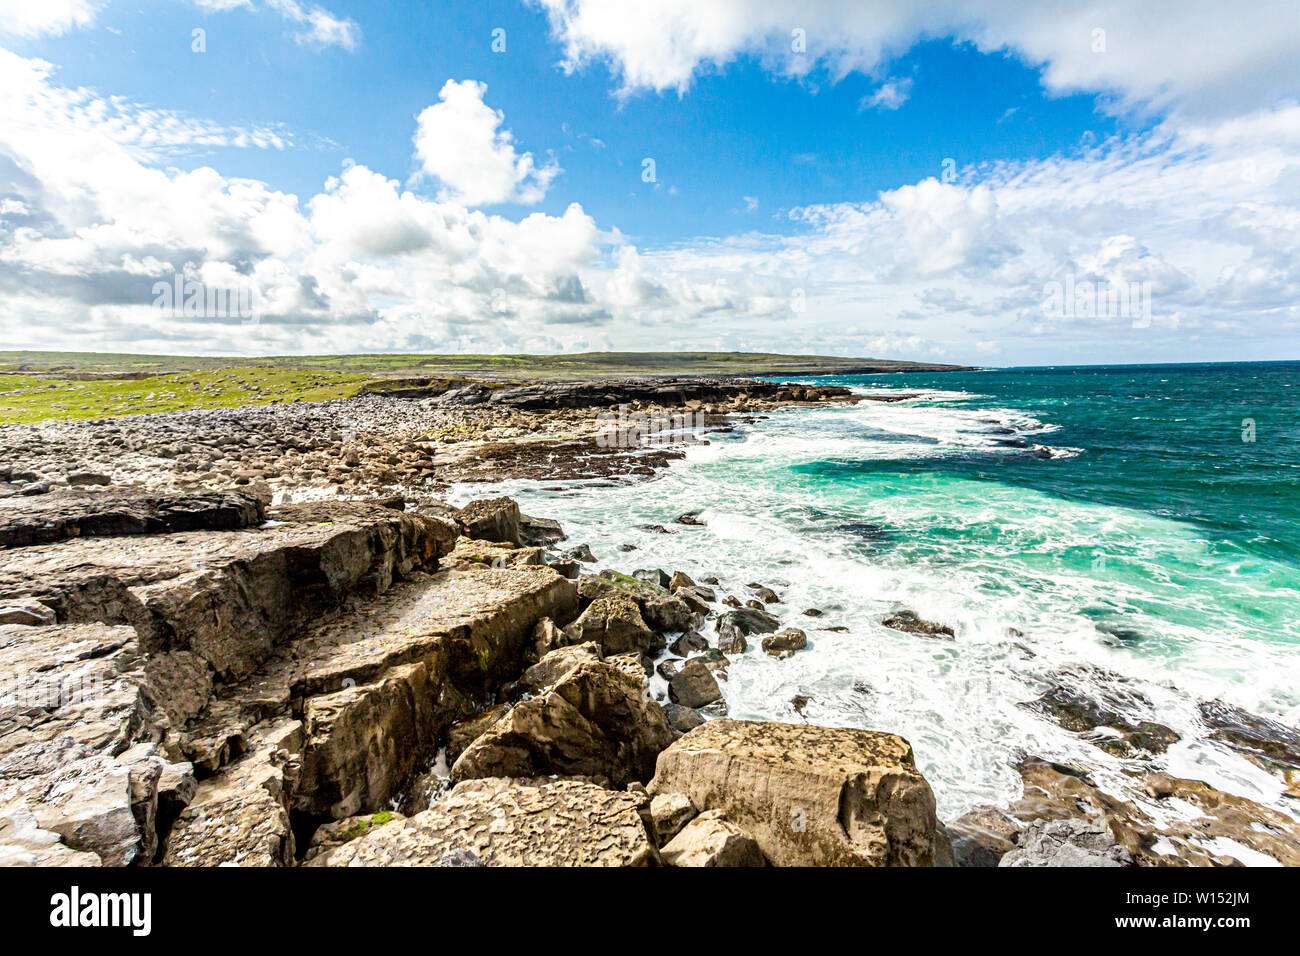 Spectacular landscape of the sea and limestone on the coast in Bothar nA hAillite, Geopark geosites, Wild Atlantic Way, beautiful spring day Stock Photo